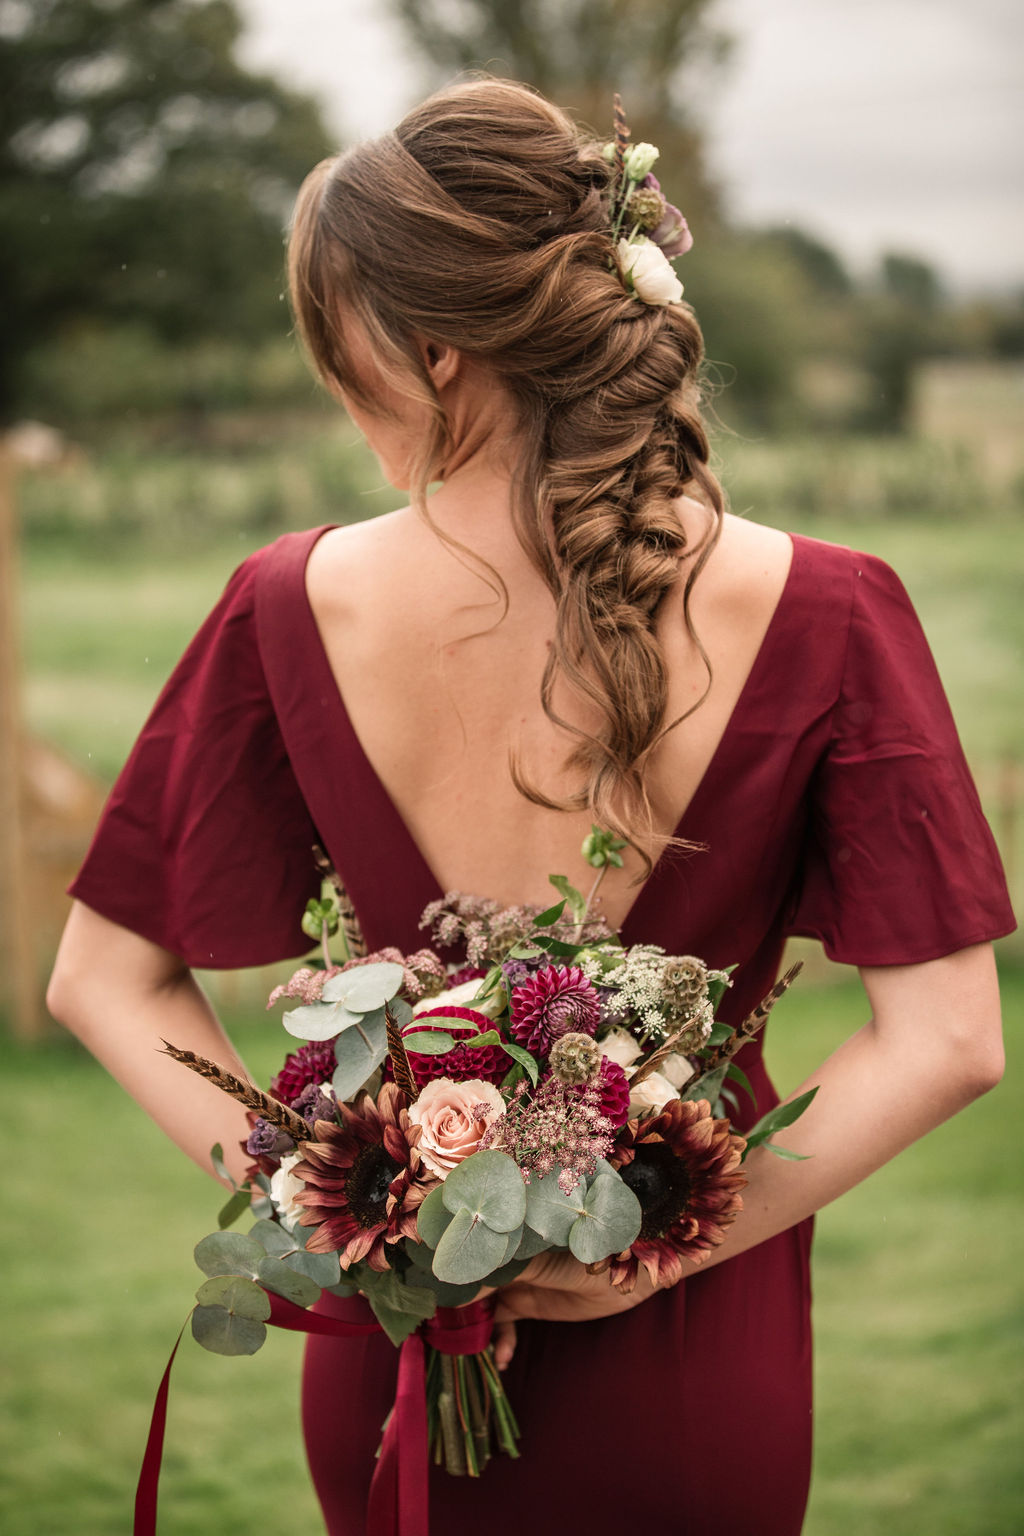 Rustic Boho Wedding with Coloured Wedding Dress at Bunkers Barn